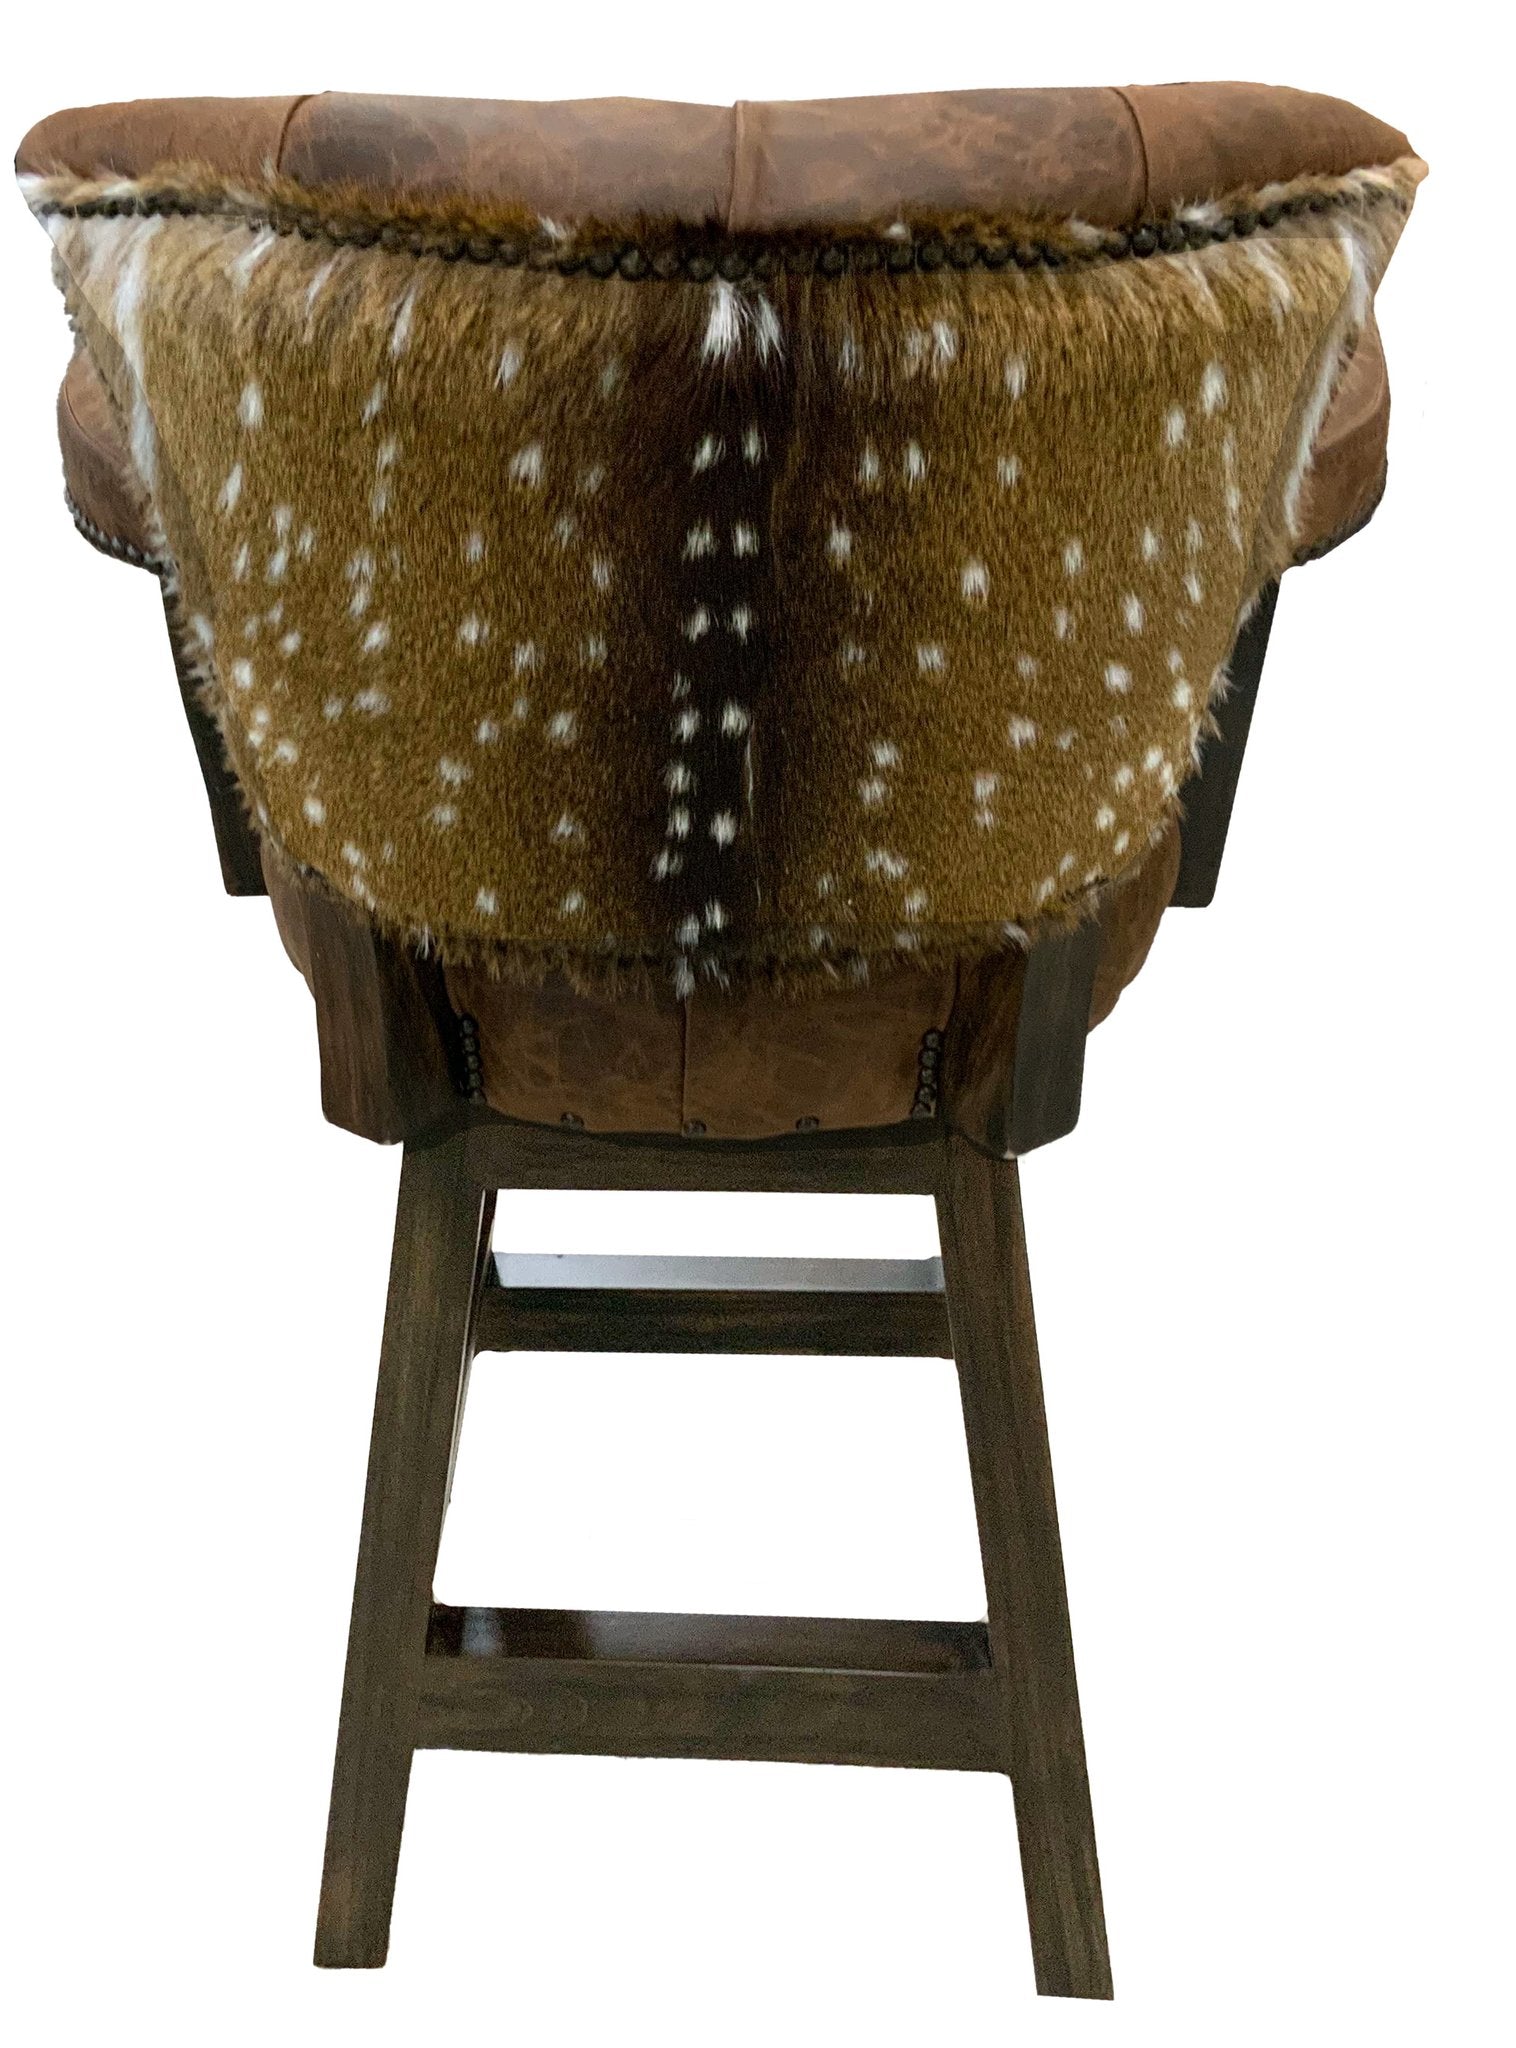 Axis Tufted Pecan Barstool